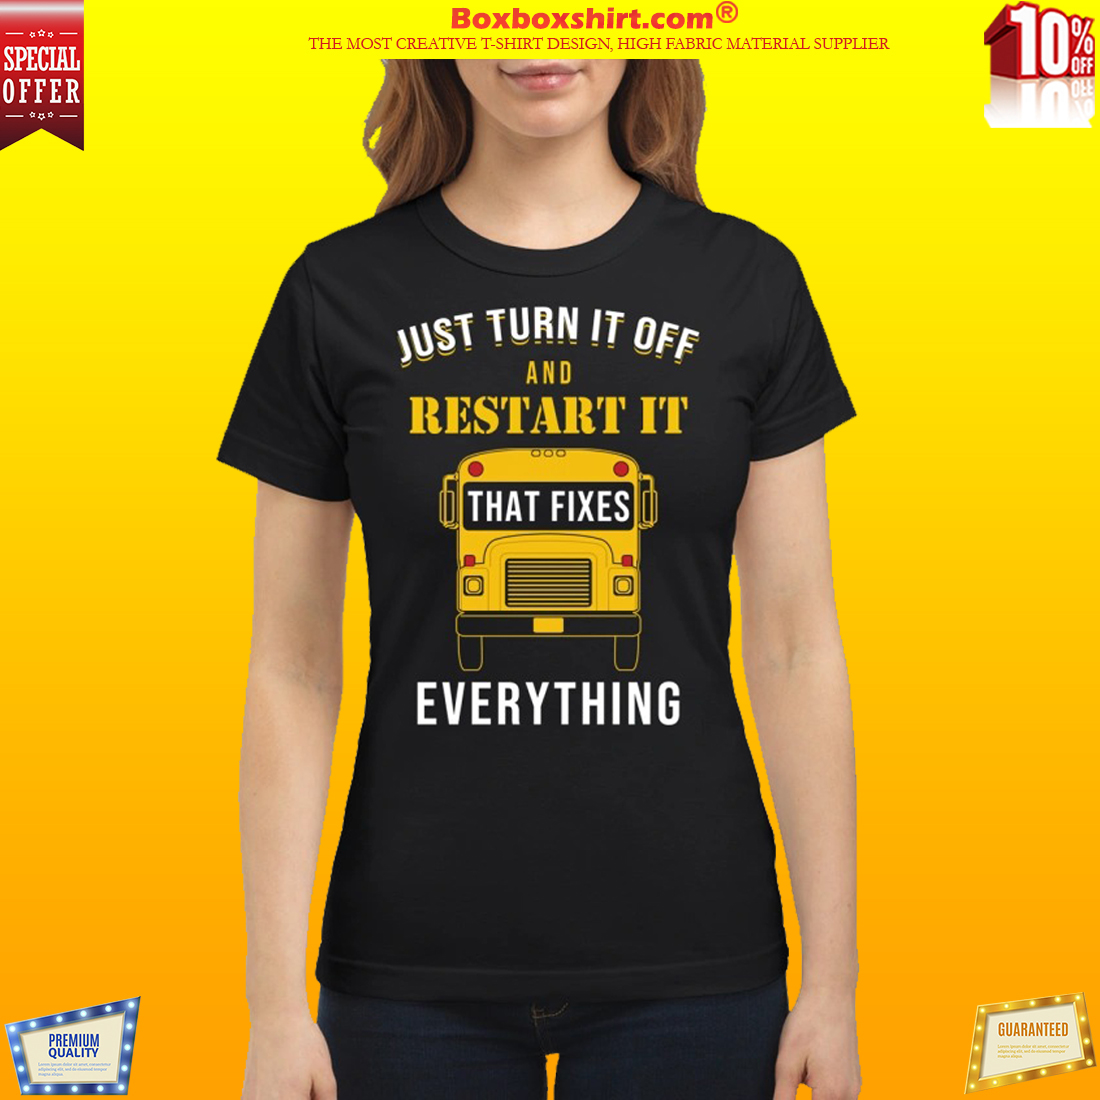 Just turn it off and restart it that fixes everything classic shirt